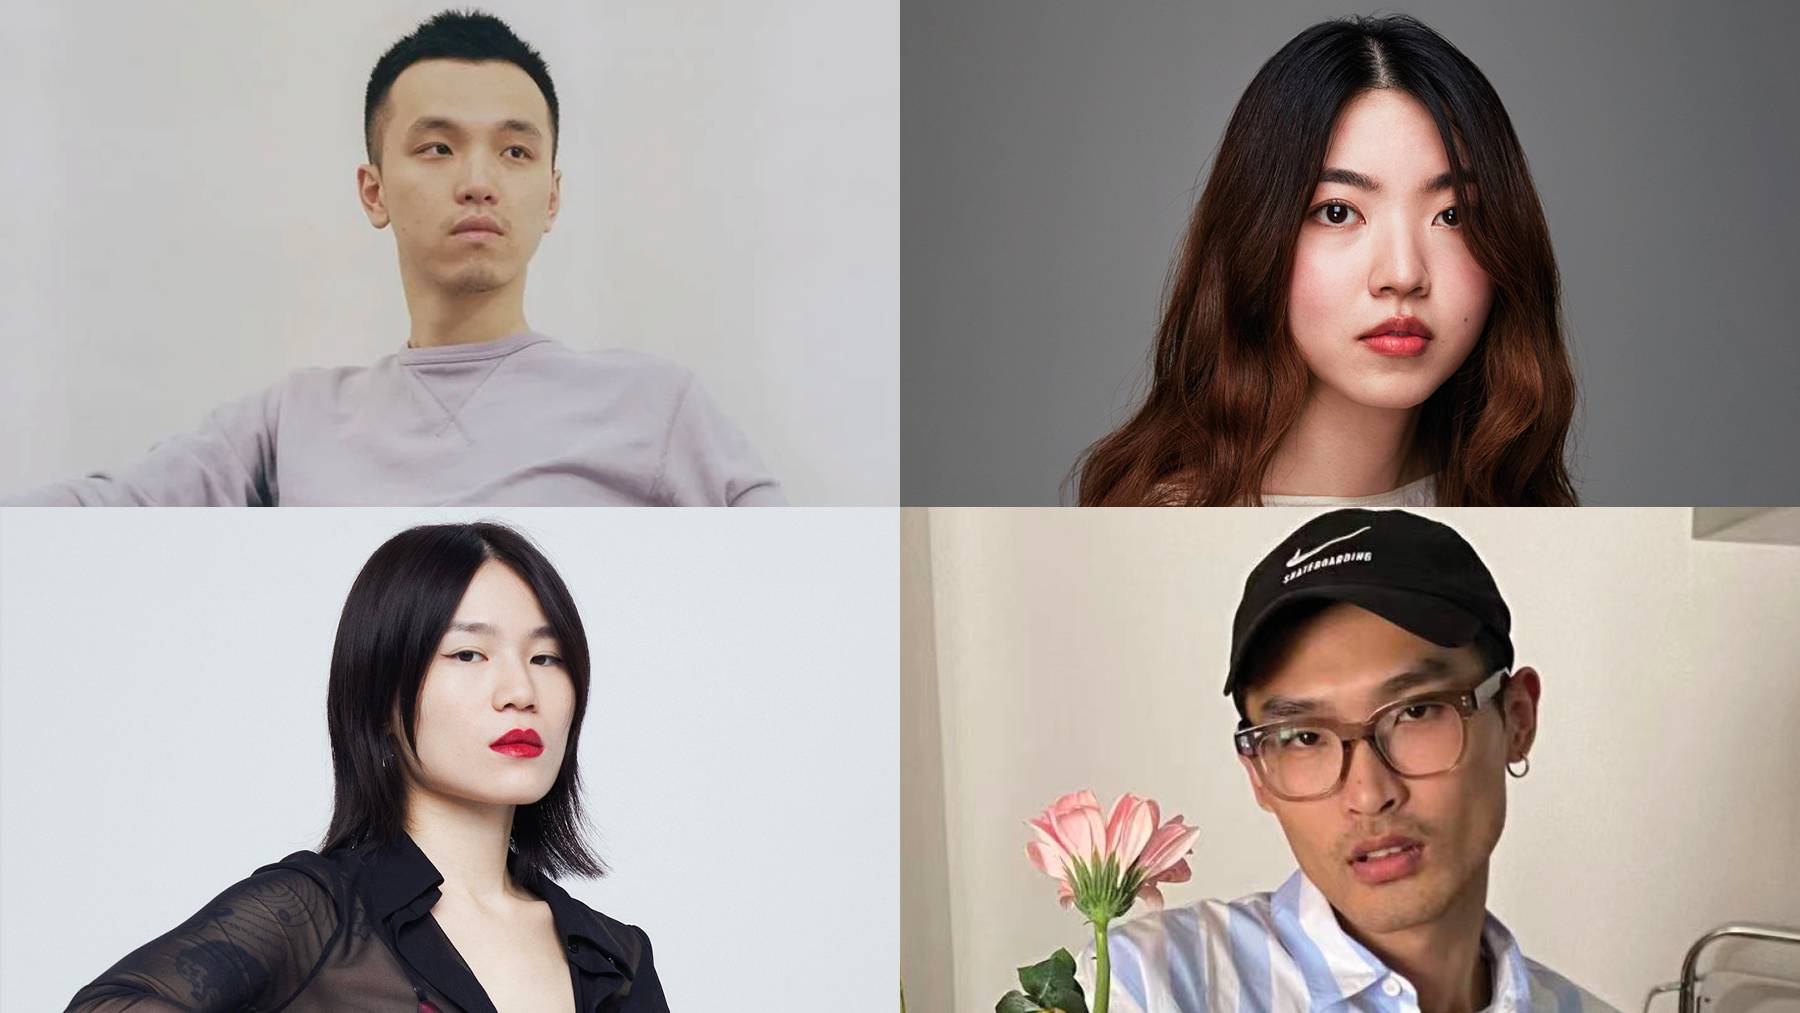 (Clockwise from top left) Xu Zhi, Susan Fang, Jacques Wei and Didu are the four designers selected for the Mytheresa's 'China Designer Program' debut.